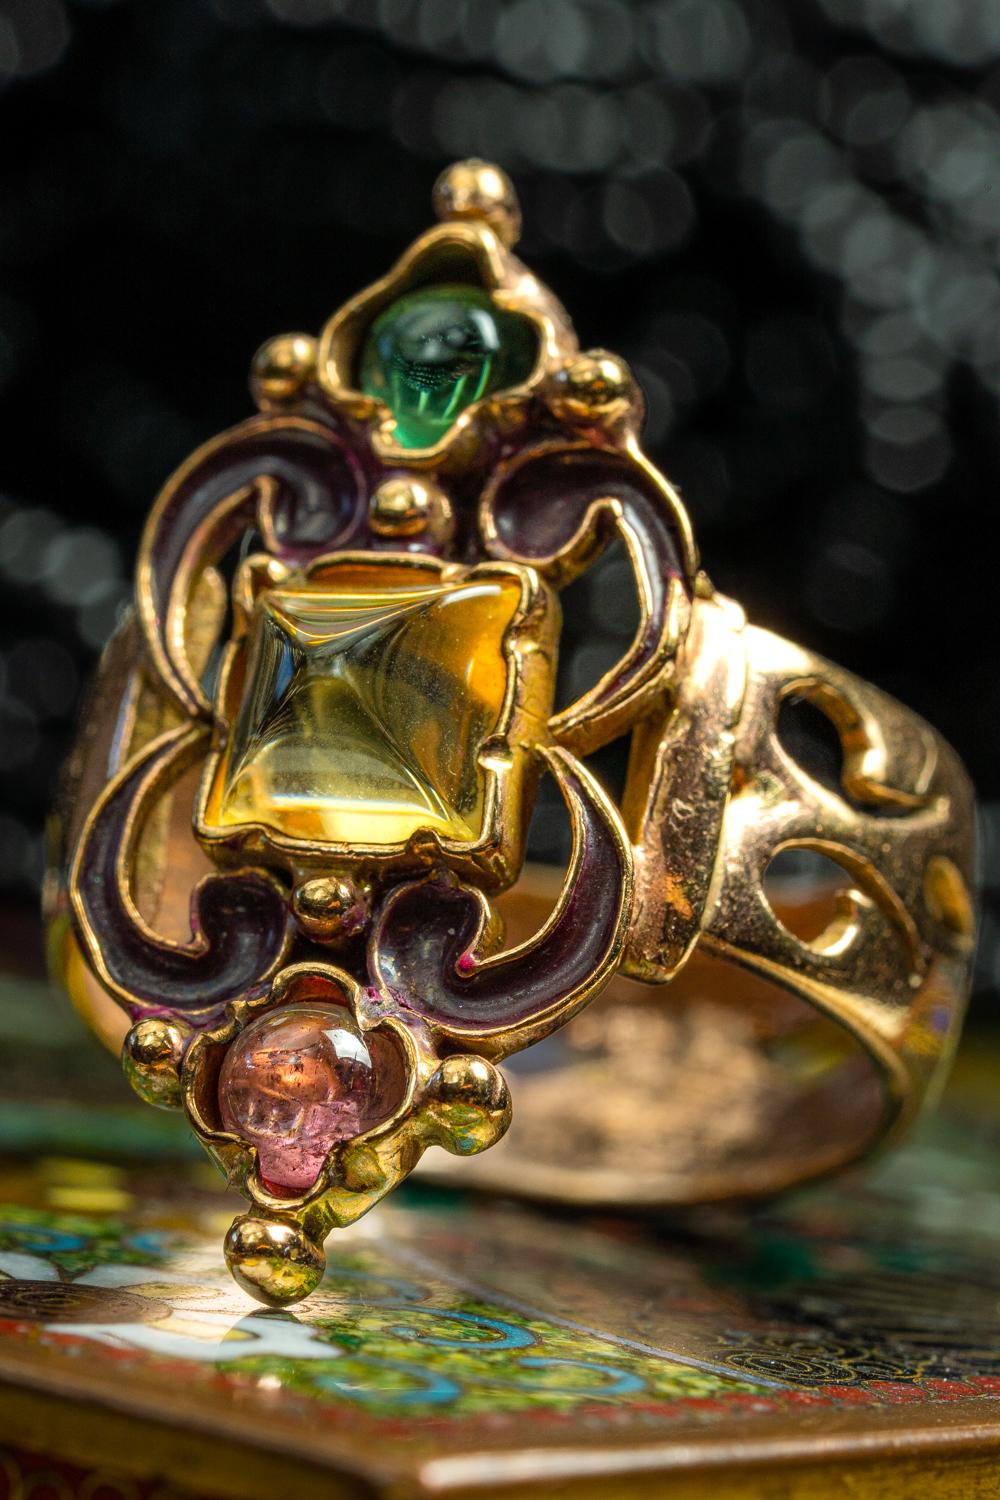 Mysterious, calling and full of old glory, this statement antique citrine ring is here to charm you away. Fantasy and shimmer in an oriental dream.
The ring is crafted in solid 8 ct rose gold and has a wide cut-out shank decorated with scalloped